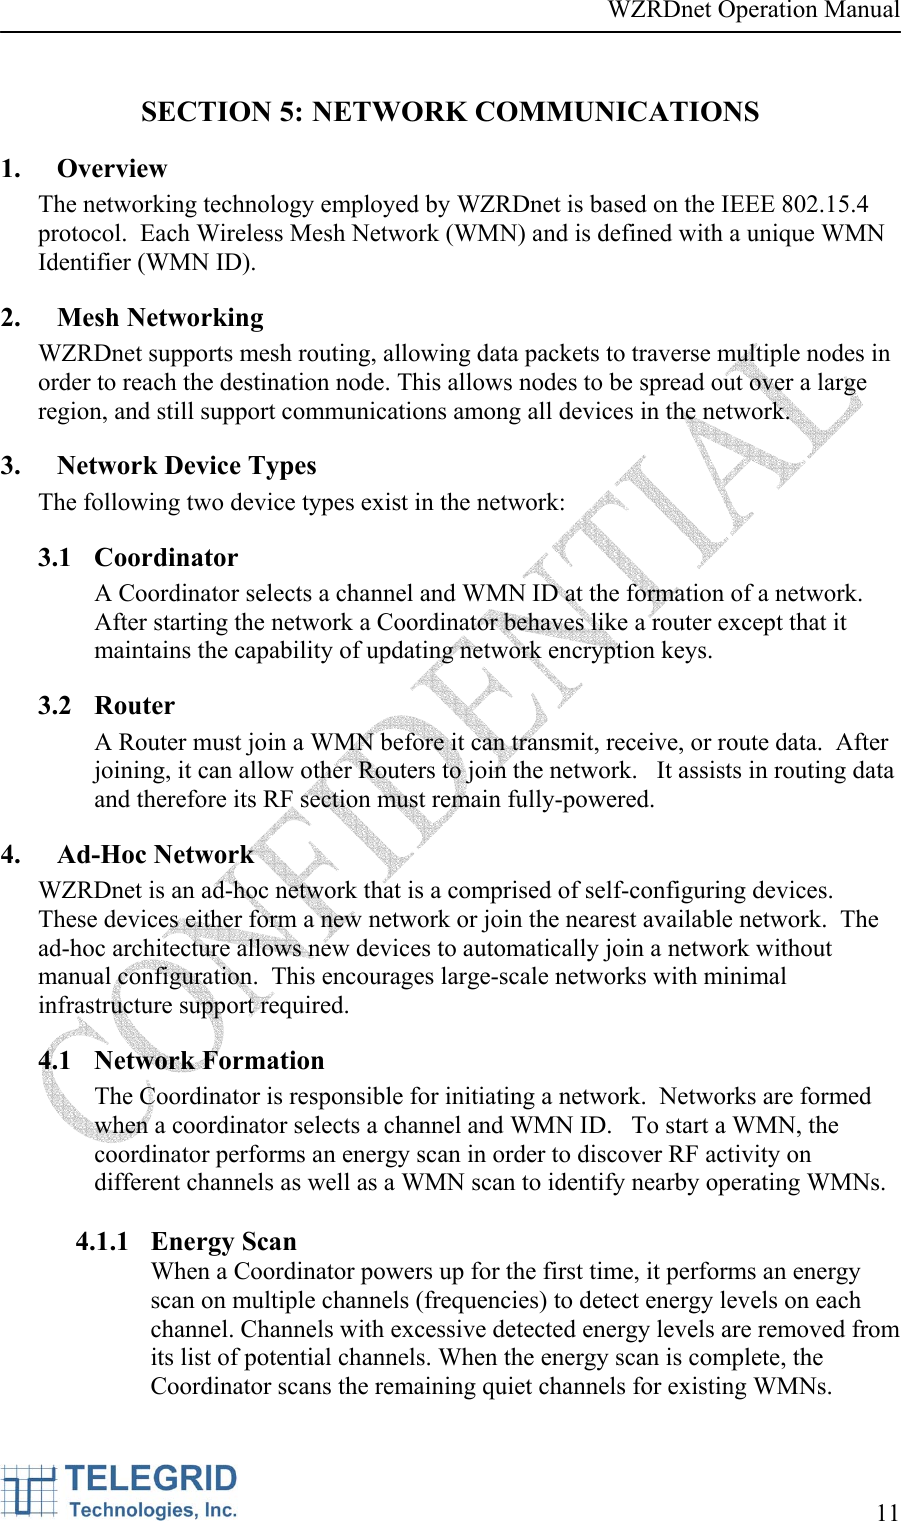 WZRDnet Operation Manual     11   SECTION 5: NETWORK COMMUNICATIONS 1. Overview The networking technology employed by WZRDnet is based on the IEEE 802.15.4 protocol.  Each Wireless Mesh Network (WMN) and is defined with a unique WMN Identifier (WMN ID).  2. Mesh Networking WZRDnet supports mesh routing, allowing data packets to traverse multiple nodes in order to reach the destination node. This allows nodes to be spread out over a large region, and still support communications among all devices in the network. 3. Network Device Types The following two device types exist in the network:  3.1 Coordinator A Coordinator selects a channel and WMN ID at the formation of a network.  After starting the network a Coordinator behaves like a router except that it maintains the capability of updating network encryption keys. 3.2 Router A Router must join a WMN before it can transmit, receive, or route data.  After joining, it can allow other Routers to join the network.   It assists in routing data and therefore its RF section must remain fully-powered. 4. Ad-Hoc Network WZRDnet is an ad-hoc network that is a comprised of self-configuring devices.  These devices either form a new network or join the nearest available network.  The ad-hoc architecture allows new devices to automatically join a network without manual configuration.  This encourages large-scale networks with minimal infrastructure support required.   4.1 Network Formation The Coordinator is responsible for initiating a network.  Networks are formed when a coordinator selects a channel and WMN ID.   To start a WMN, the coordinator performs an energy scan in order to discover RF activity on different channels as well as a WMN scan to identify nearby operating WMNs.    4.1.1 Energy Scan When a Coordinator powers up for the first time, it performs an energy scan on multiple channels (frequencies) to detect energy levels on each channel. Channels with excessive detected energy levels are removed from its list of potential channels. When the energy scan is complete, the Coordinator scans the remaining quiet channels for existing WMNs.  